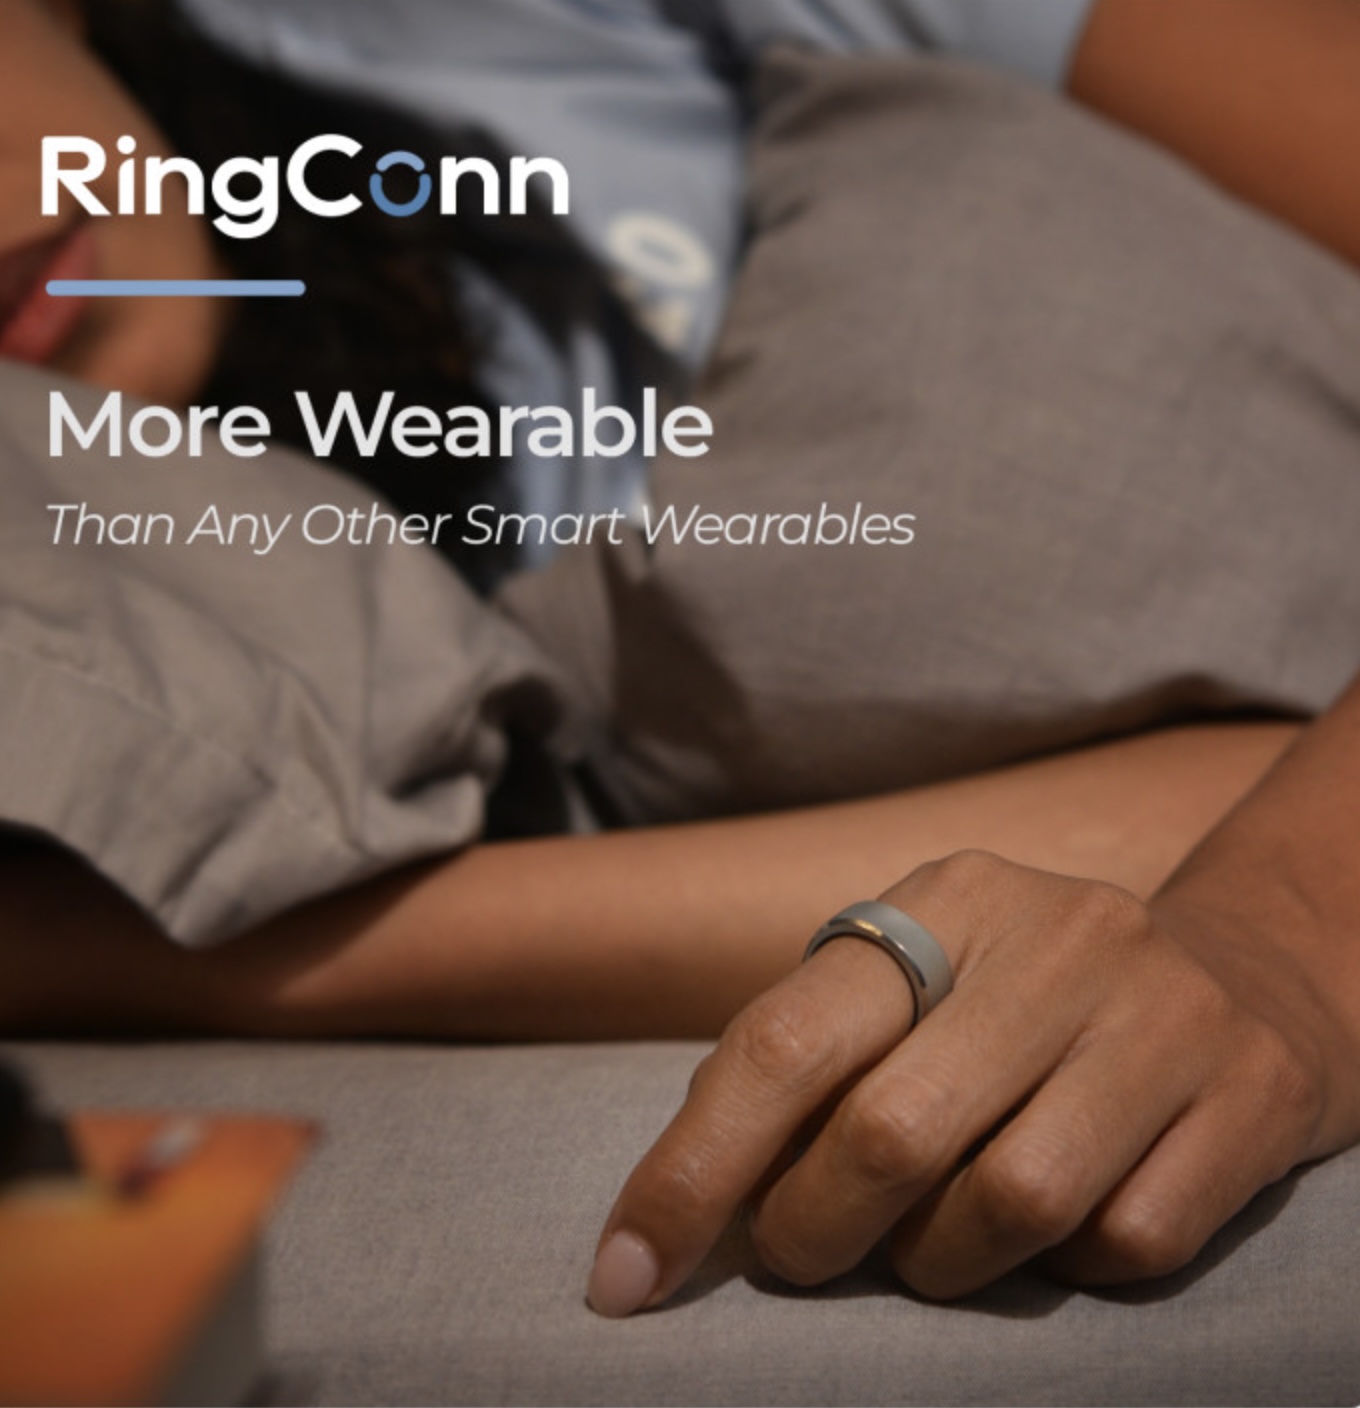 Kickstarter: RingConn Smart Ring - the Smartest Wearable for You - Points  with a Crew